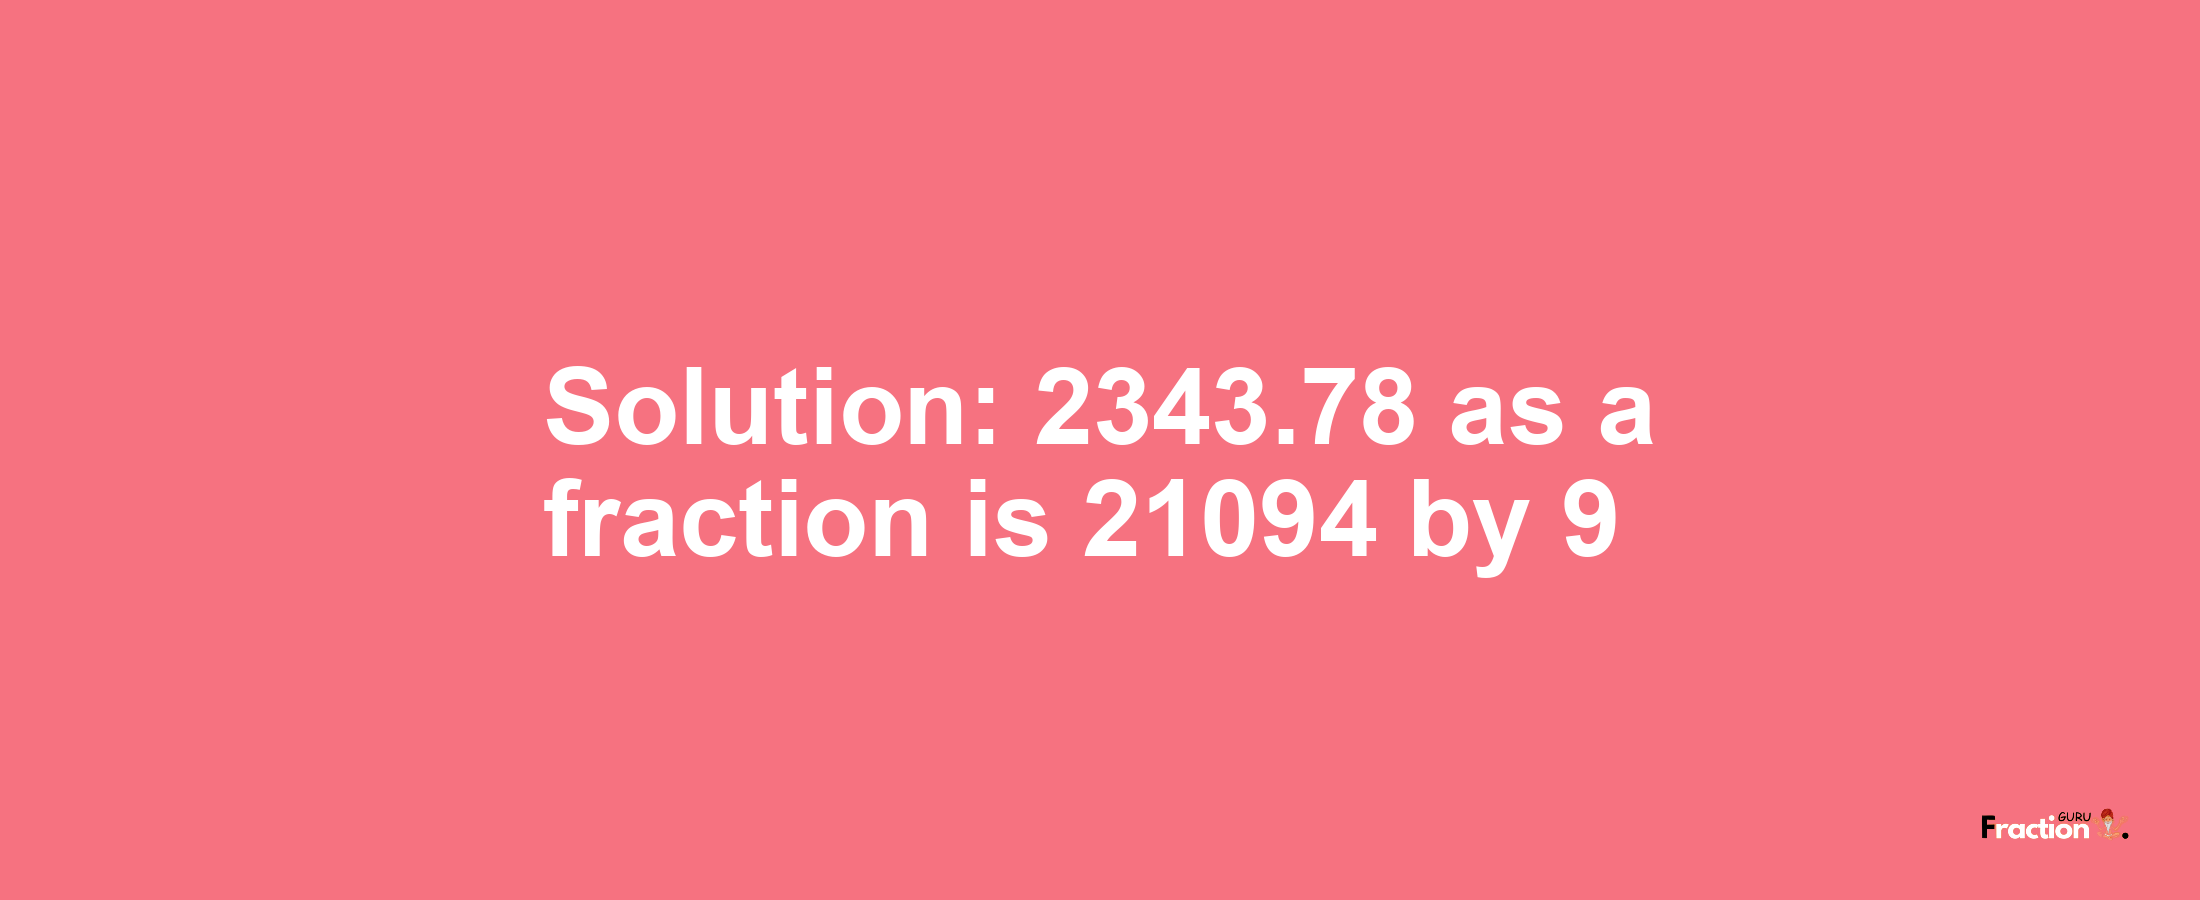 Solution:2343.78 as a fraction is 21094/9